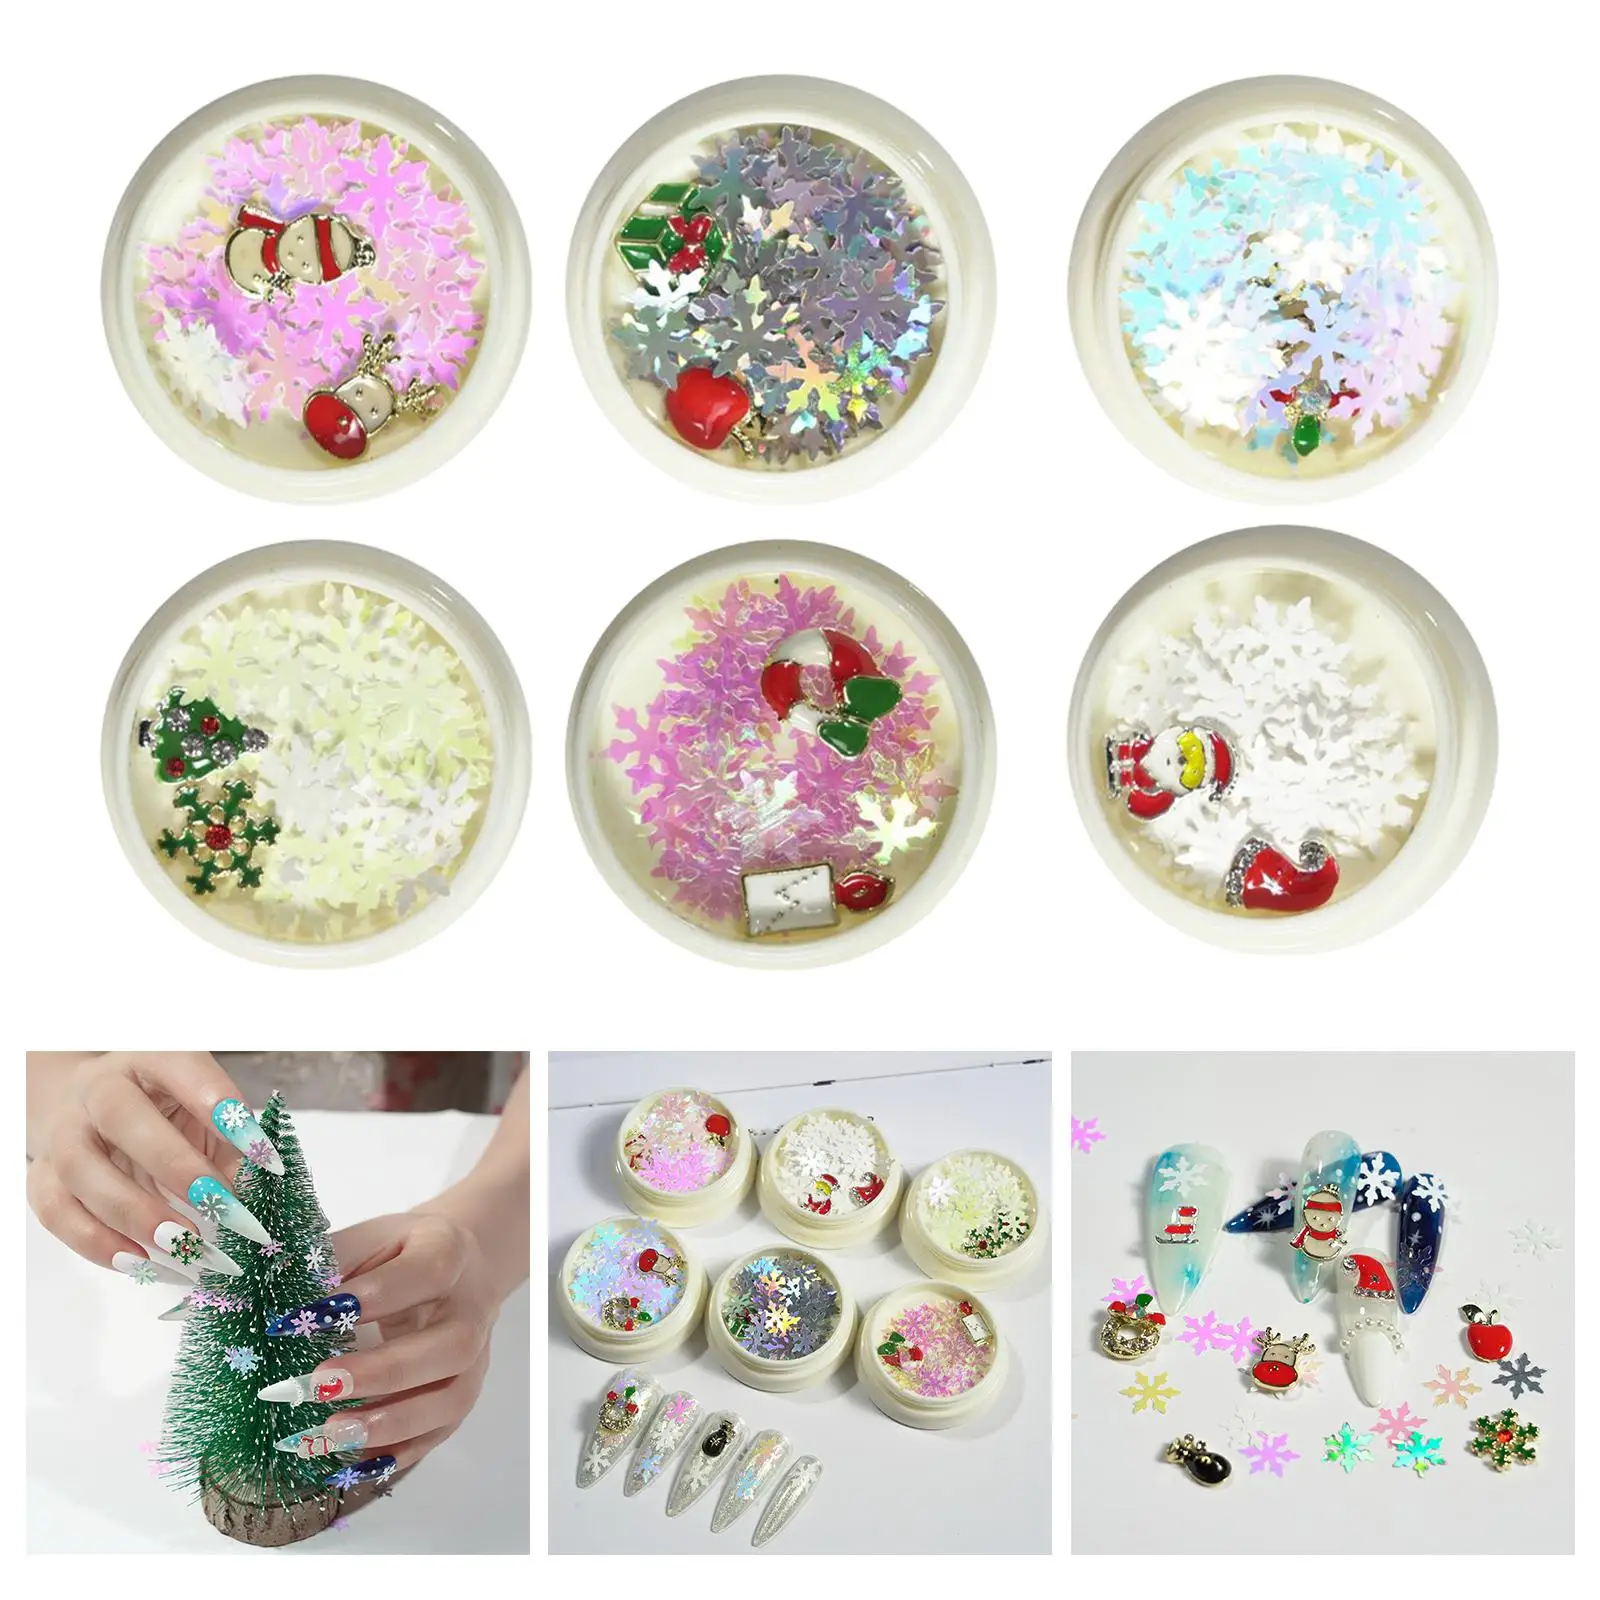 6 Colors Christmas Nail Glitter Sequins, Nail Art Design DIY Manicure Crafts Glitters Nail Art Decoration Salon Home Use